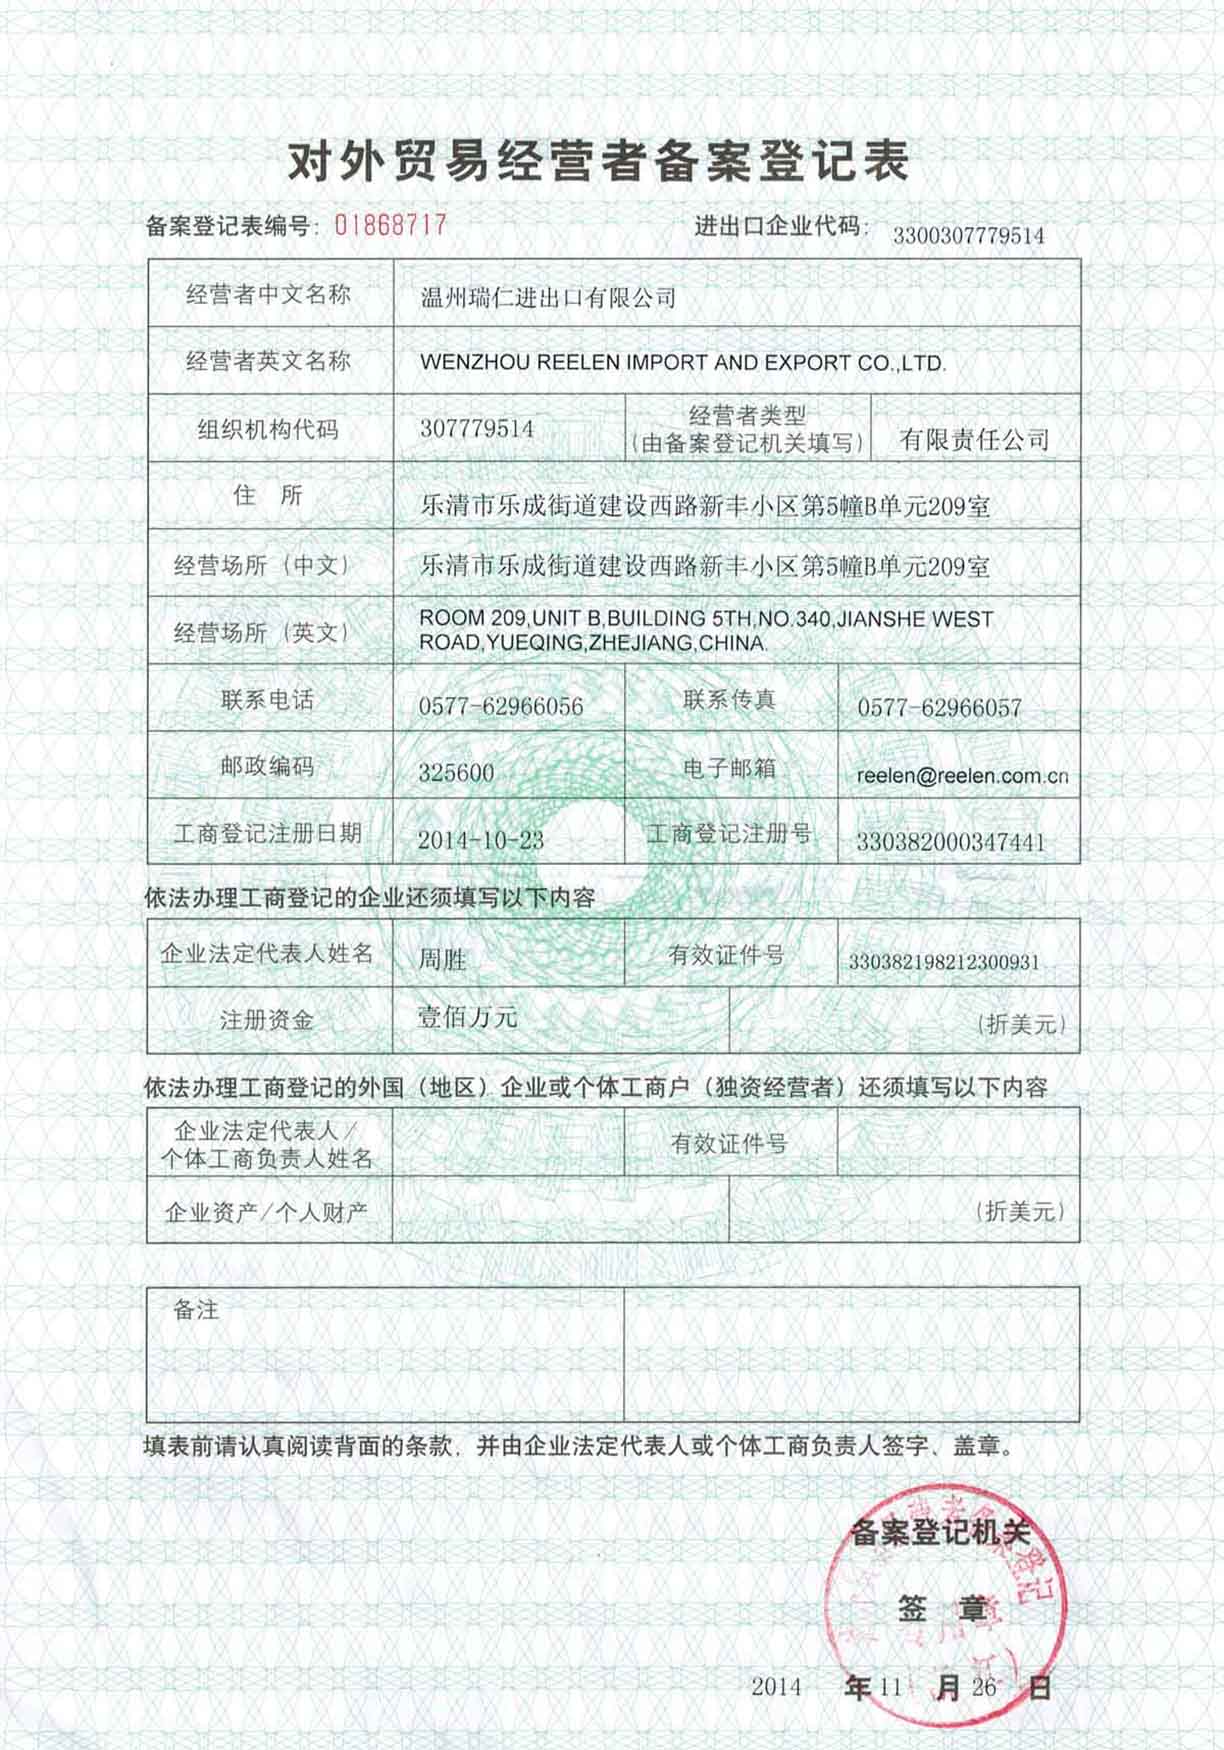 Self operated import and export rights registration form